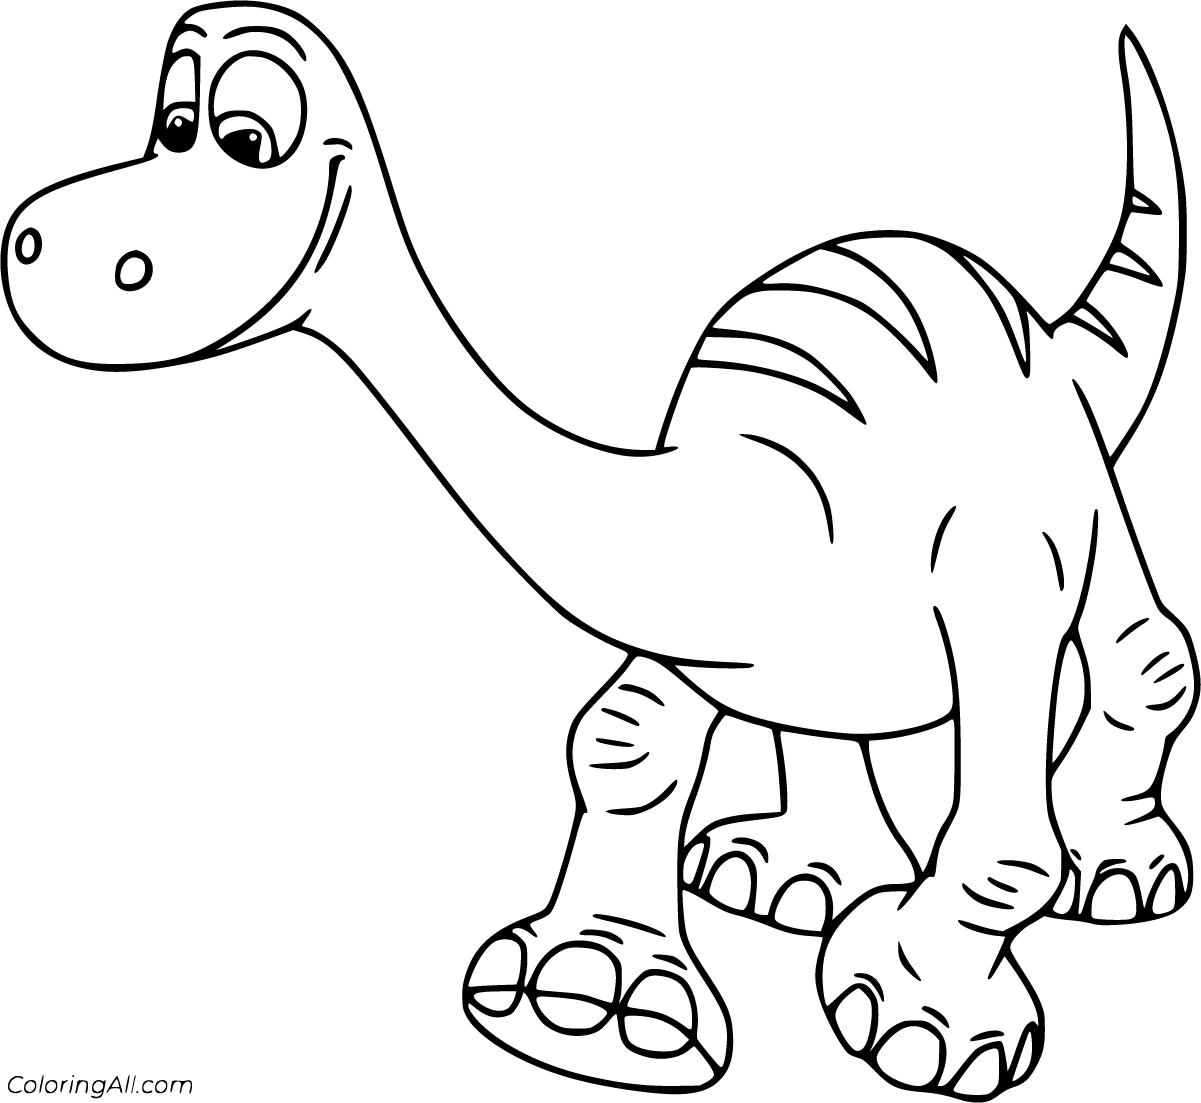 Download The Good Dinosaur Coloring Pages - ColoringAll